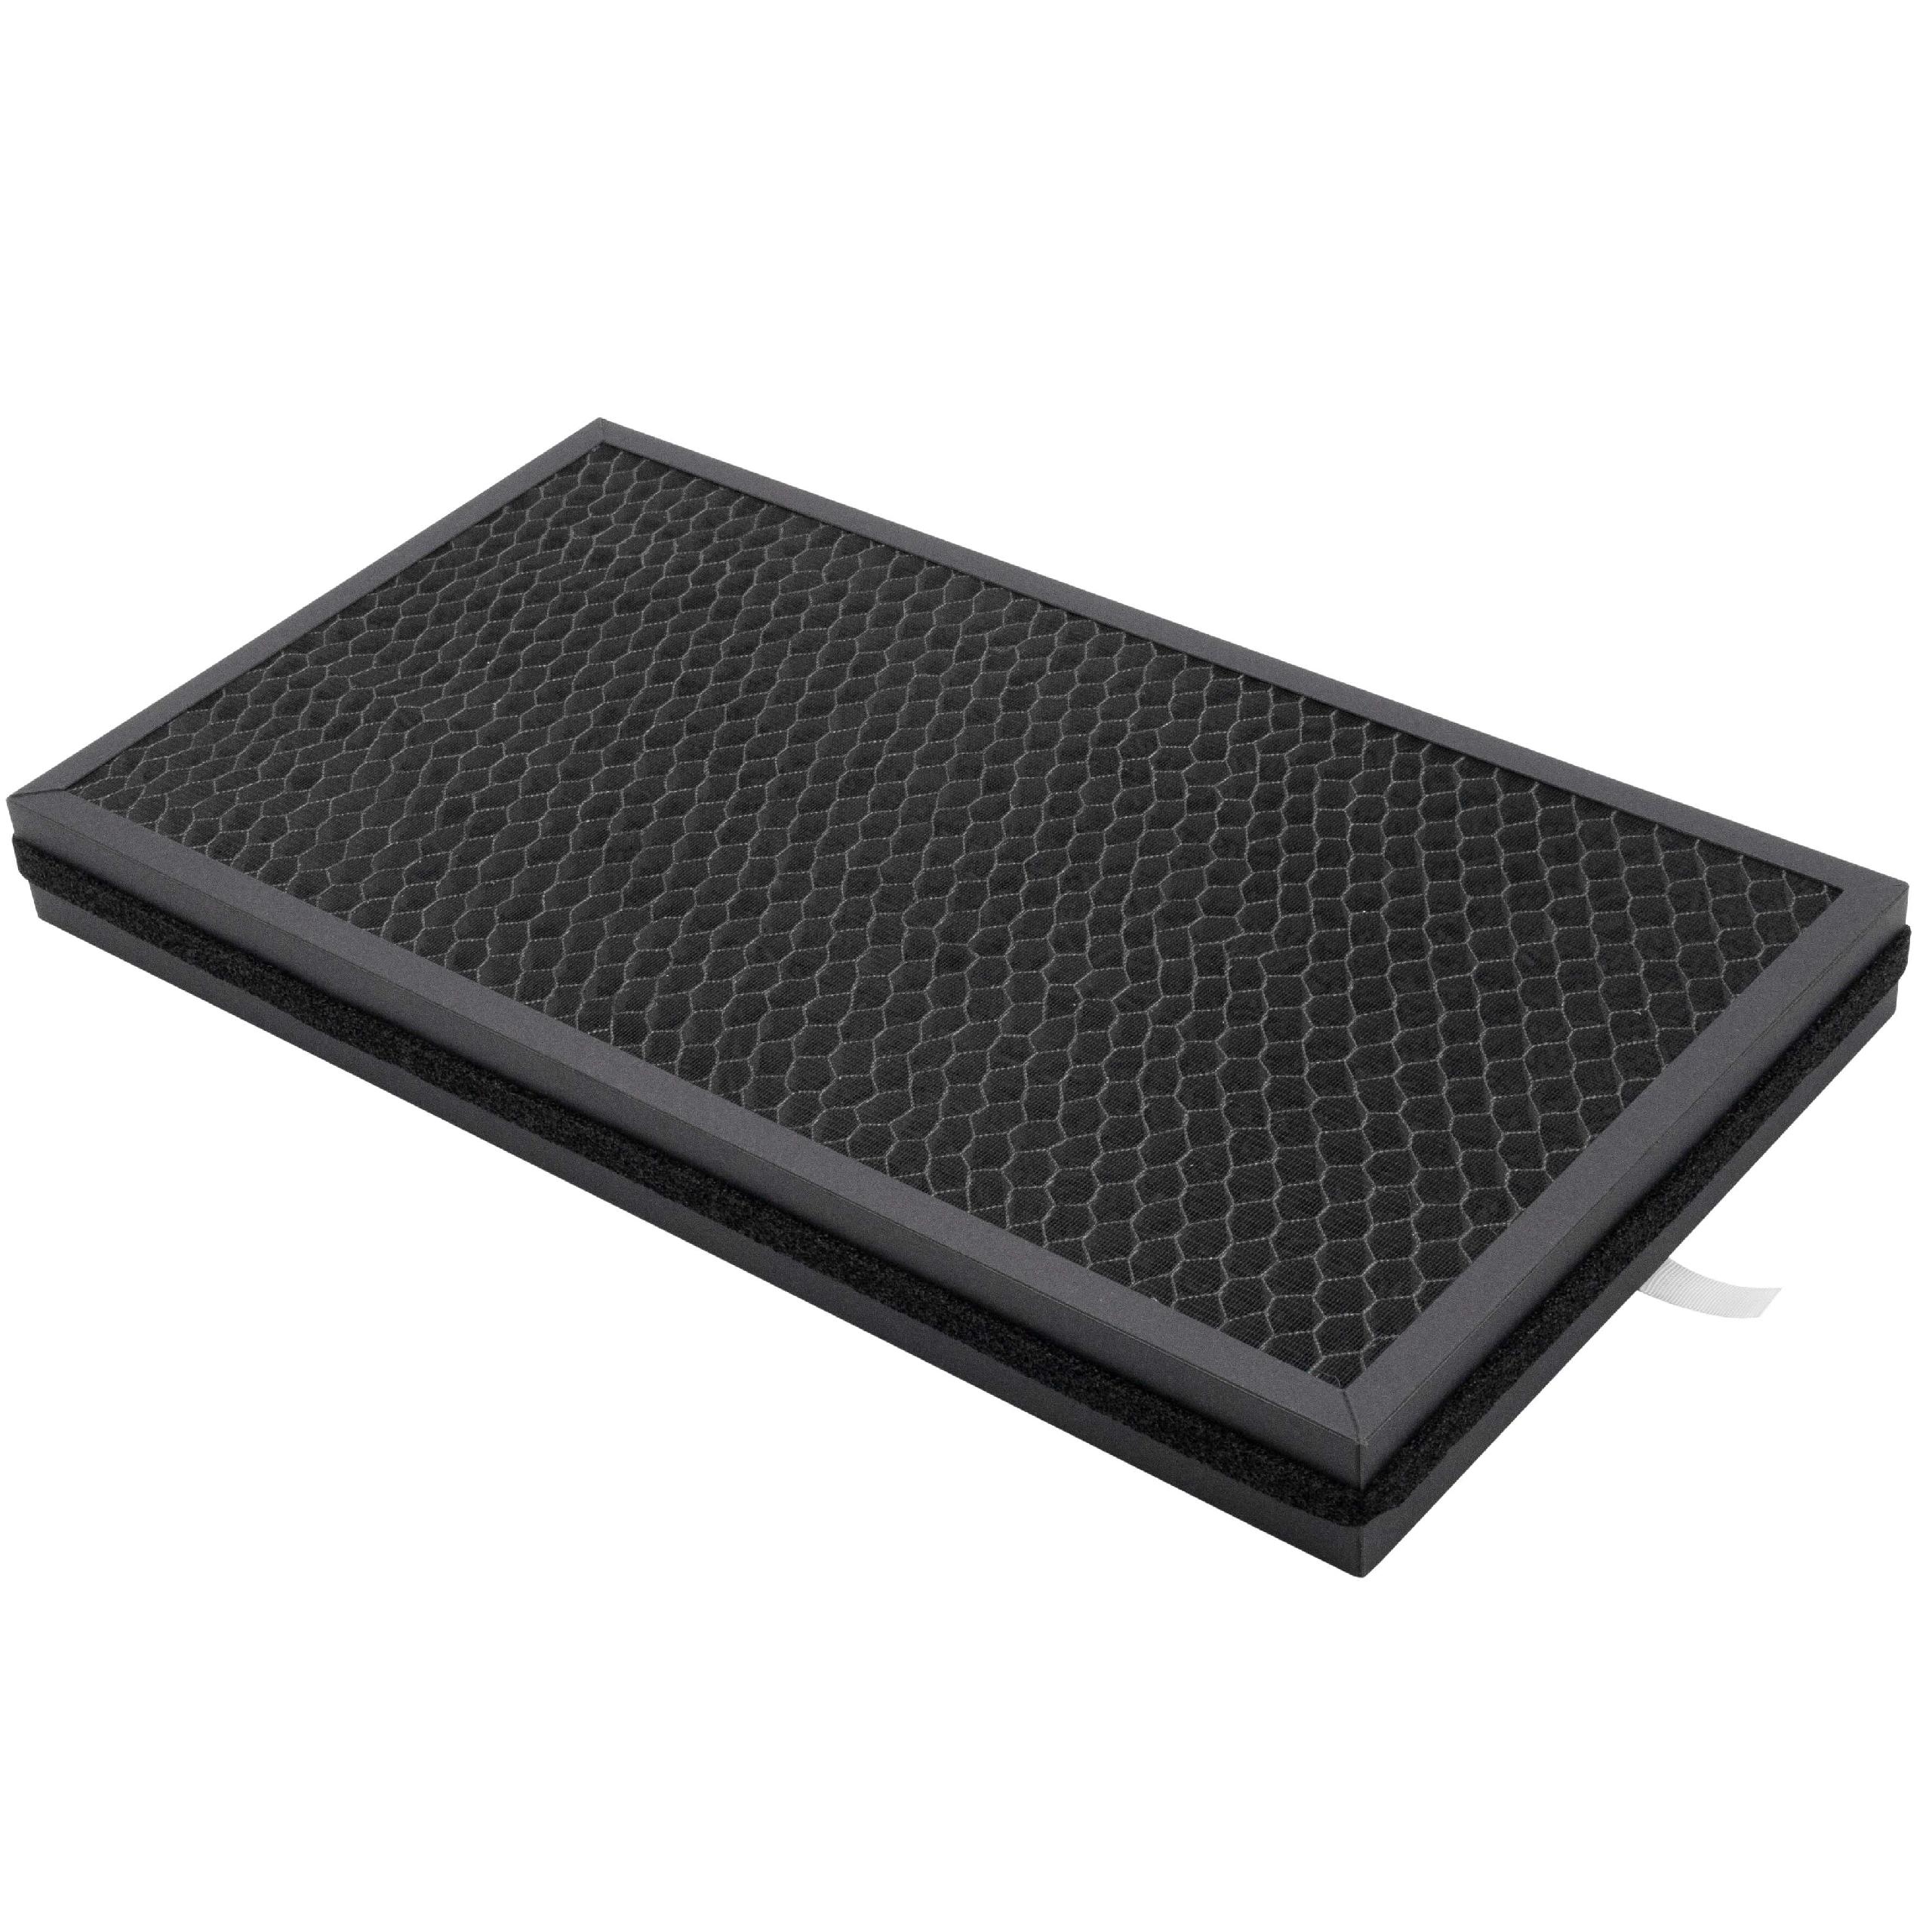 Filter as Replacement for Boneco A341 - HEPA + Activated Carbon, 40 x 21.8 x 3.6 cm